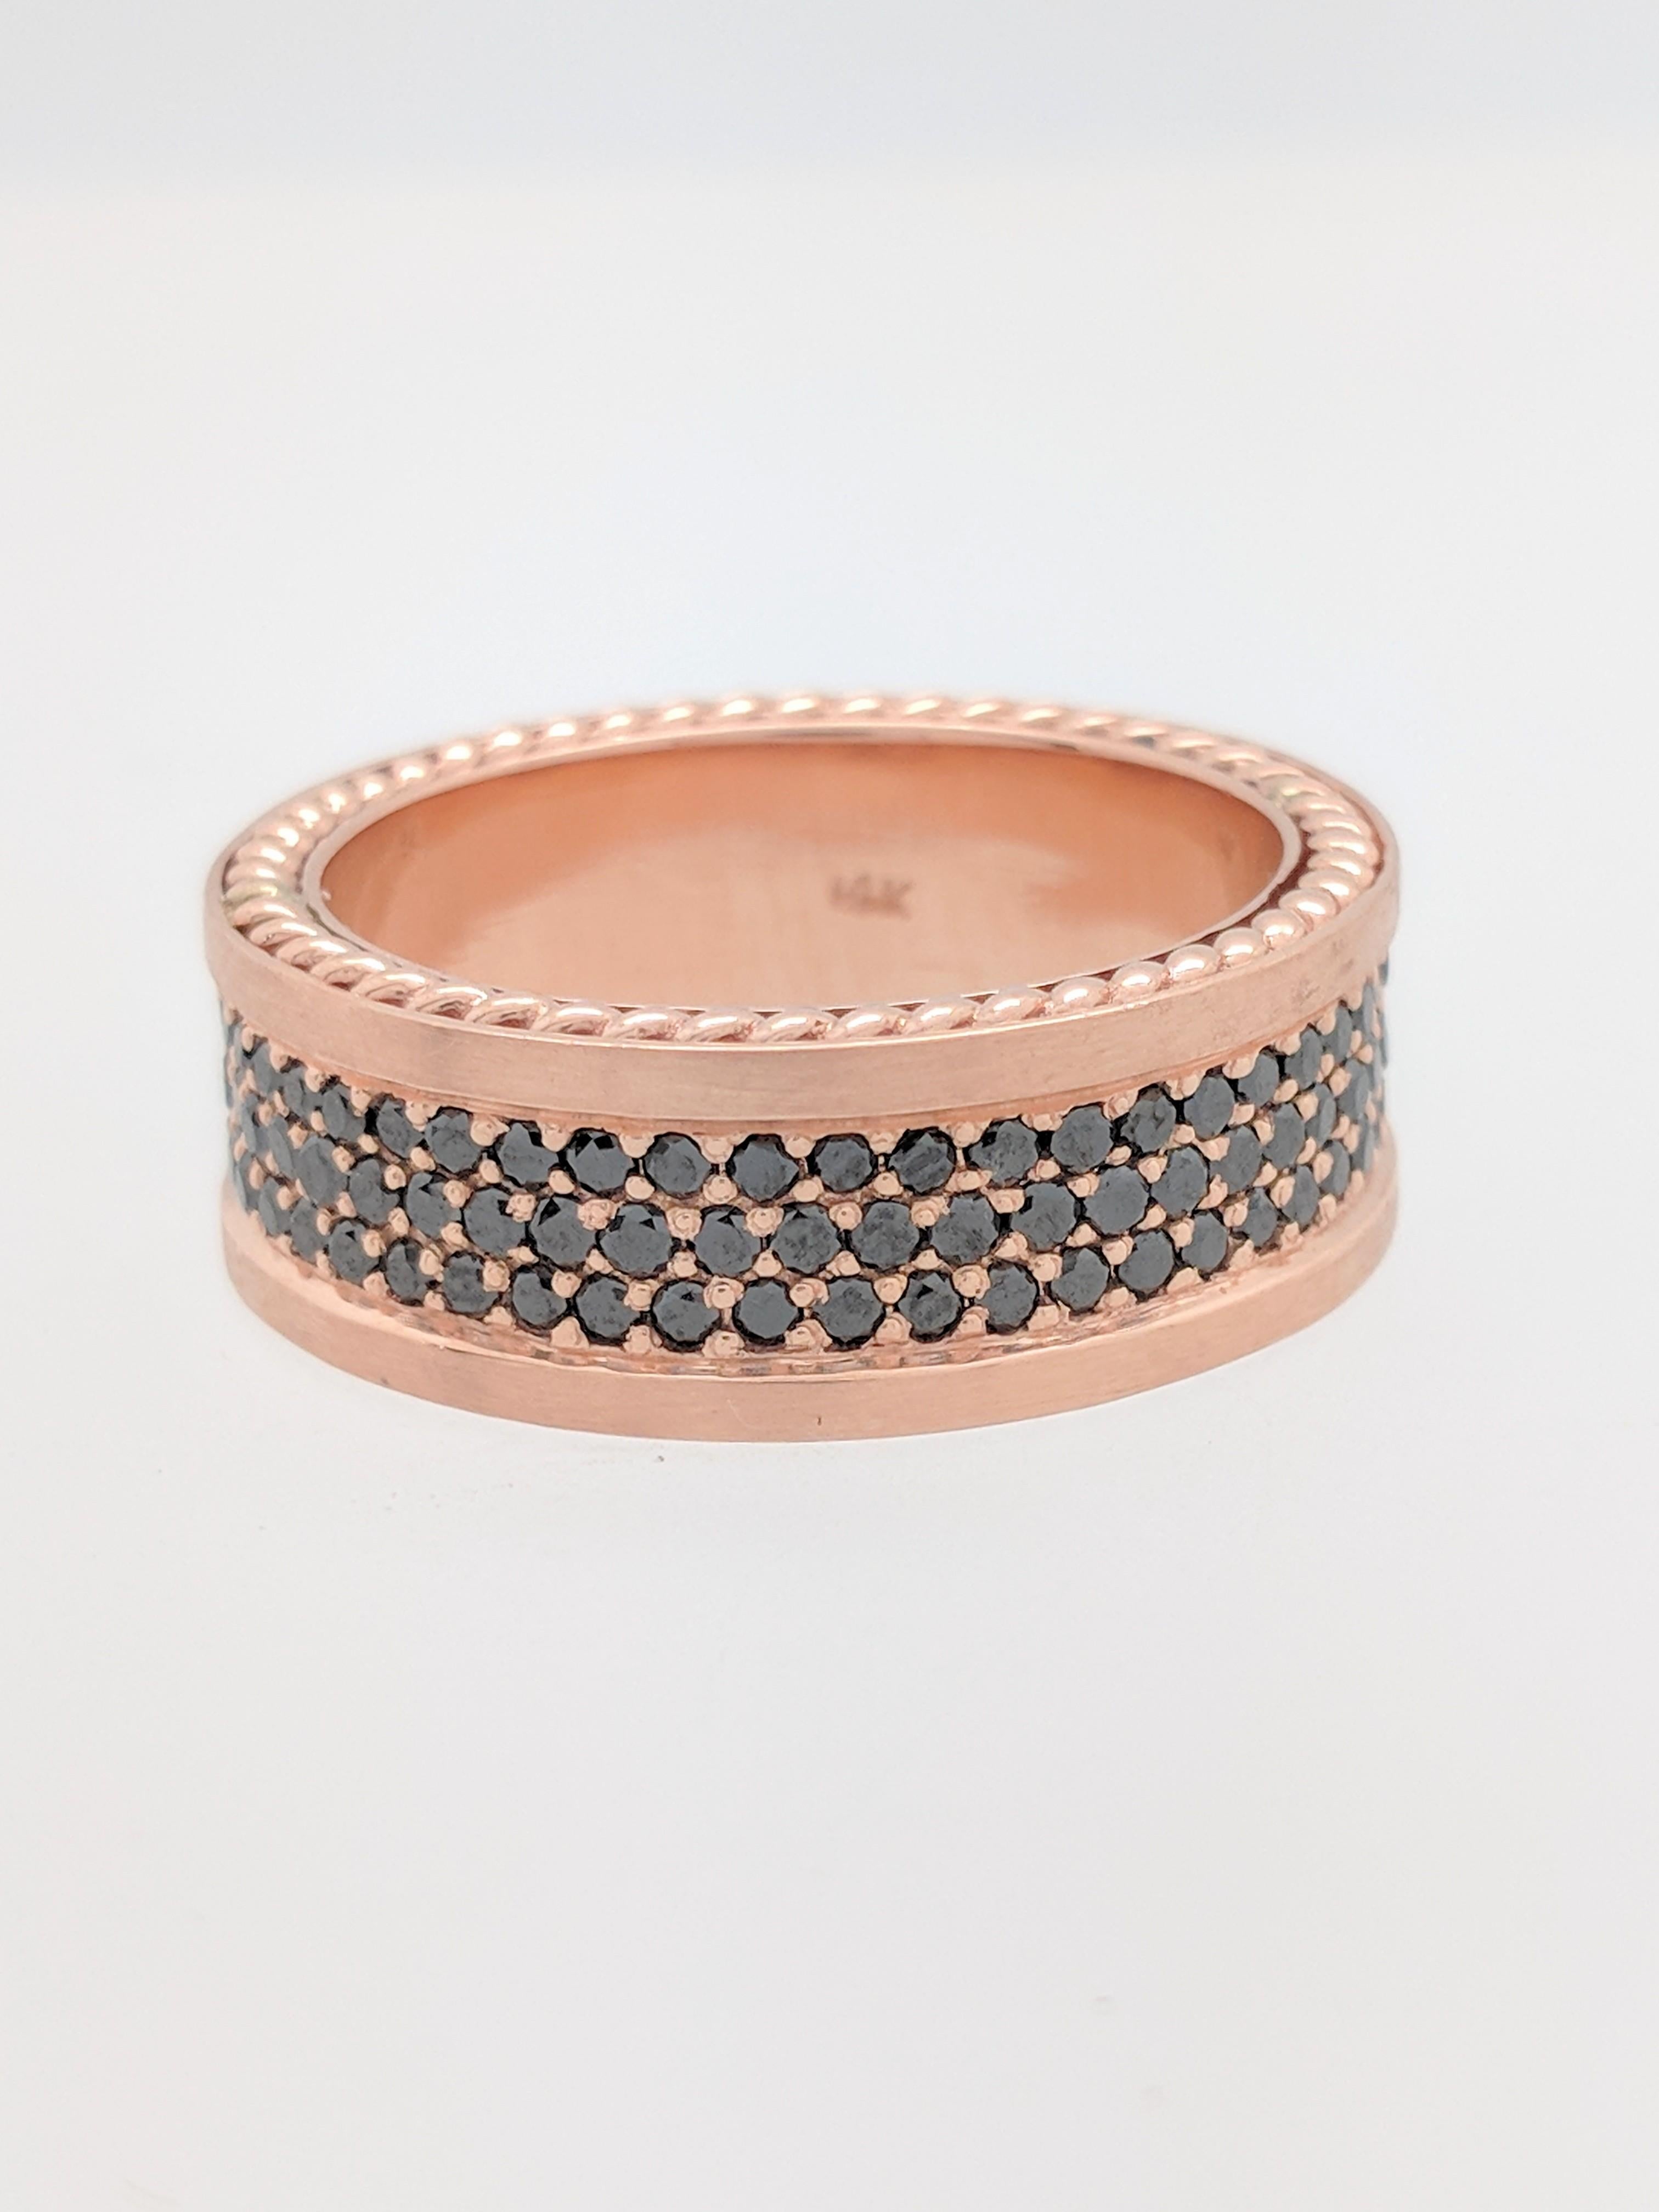 You are viewing a Unique Men's Diamond Eternity Wedding Band. This band is crafted from 14k rose gold and it weighs 16 grams. It a size 10.5 and measures 9mm in width. It features 150 .01ct round natural black diamonds for an estimated 1.50ctw. This